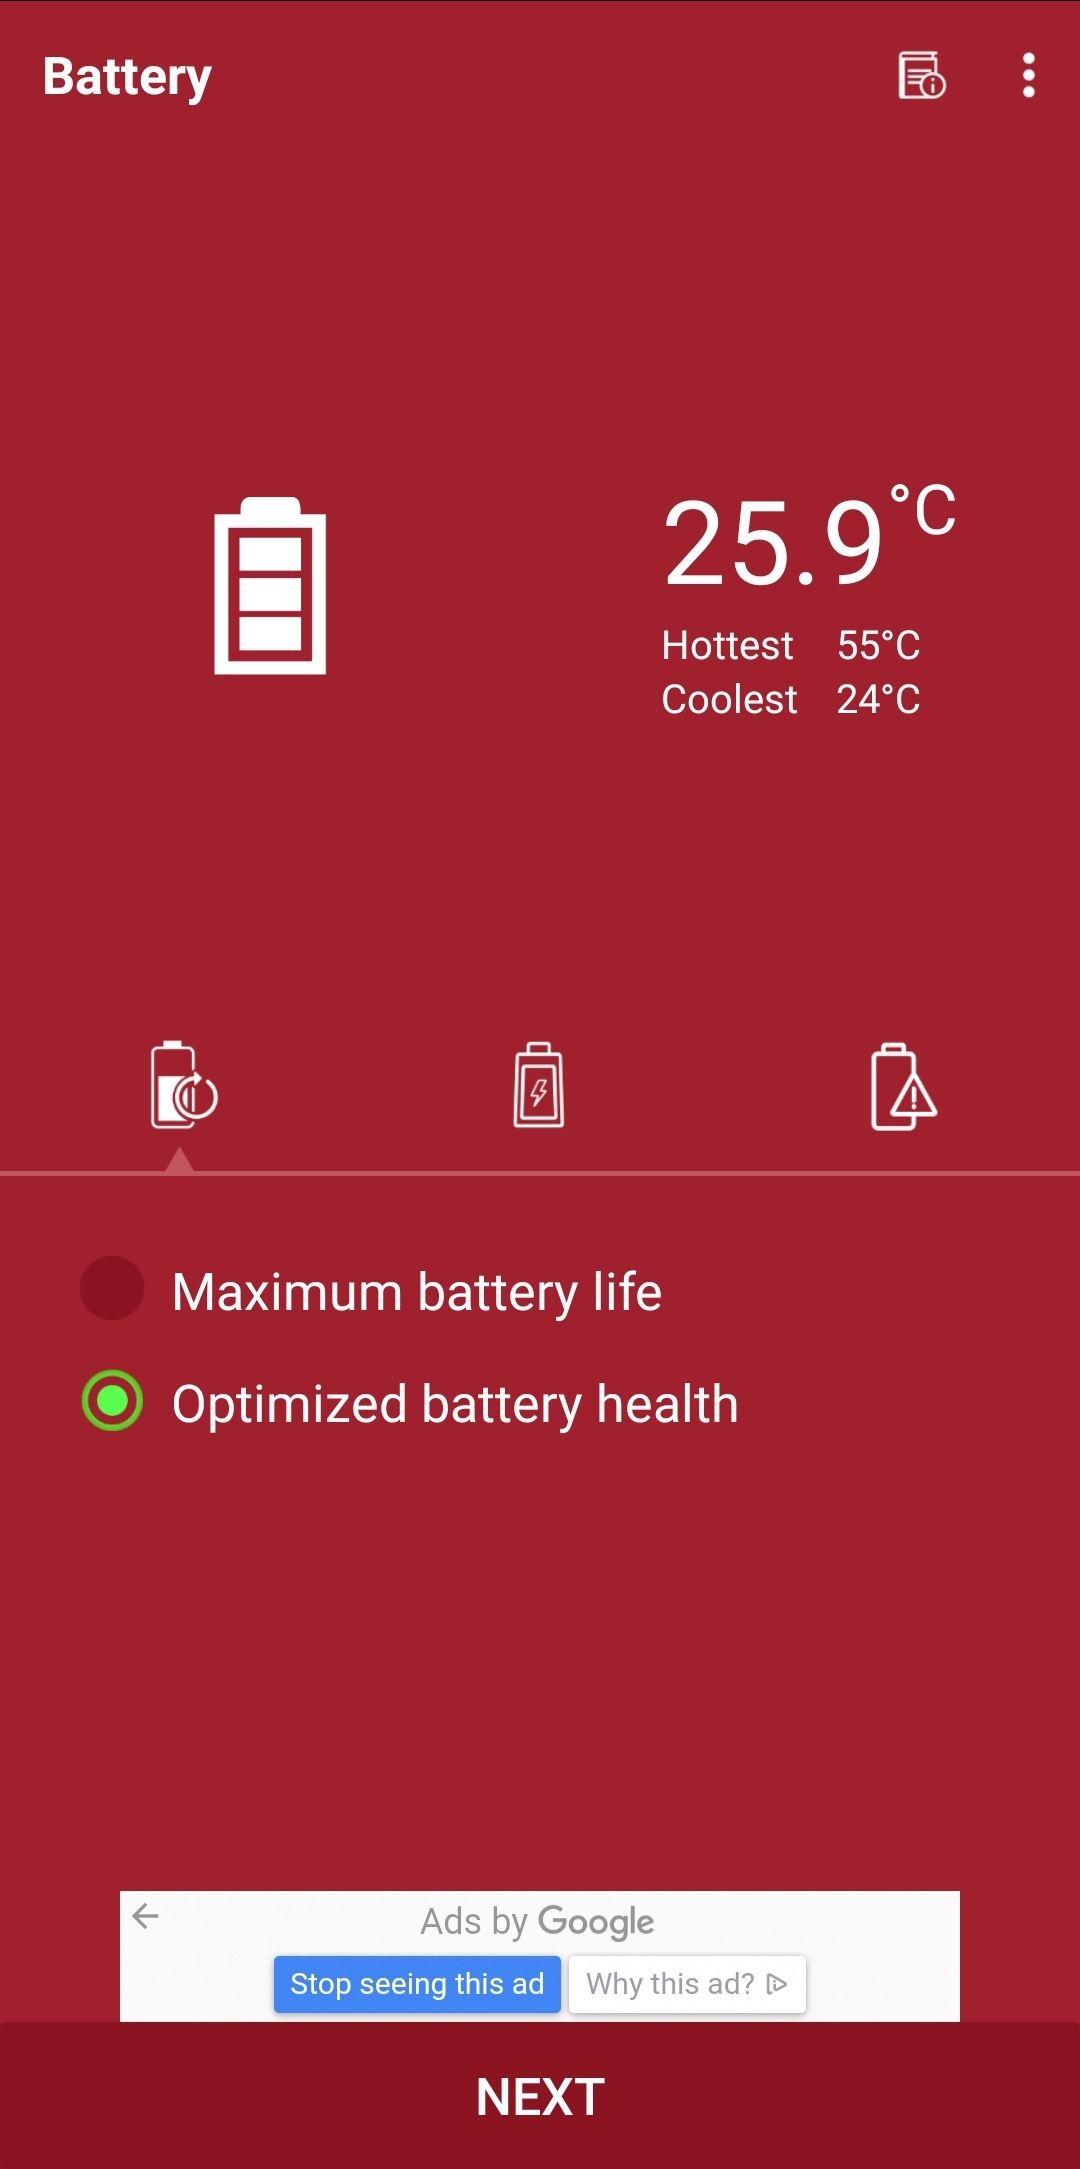 The main screen of Device Heat Cooling Master, showing battery temperature